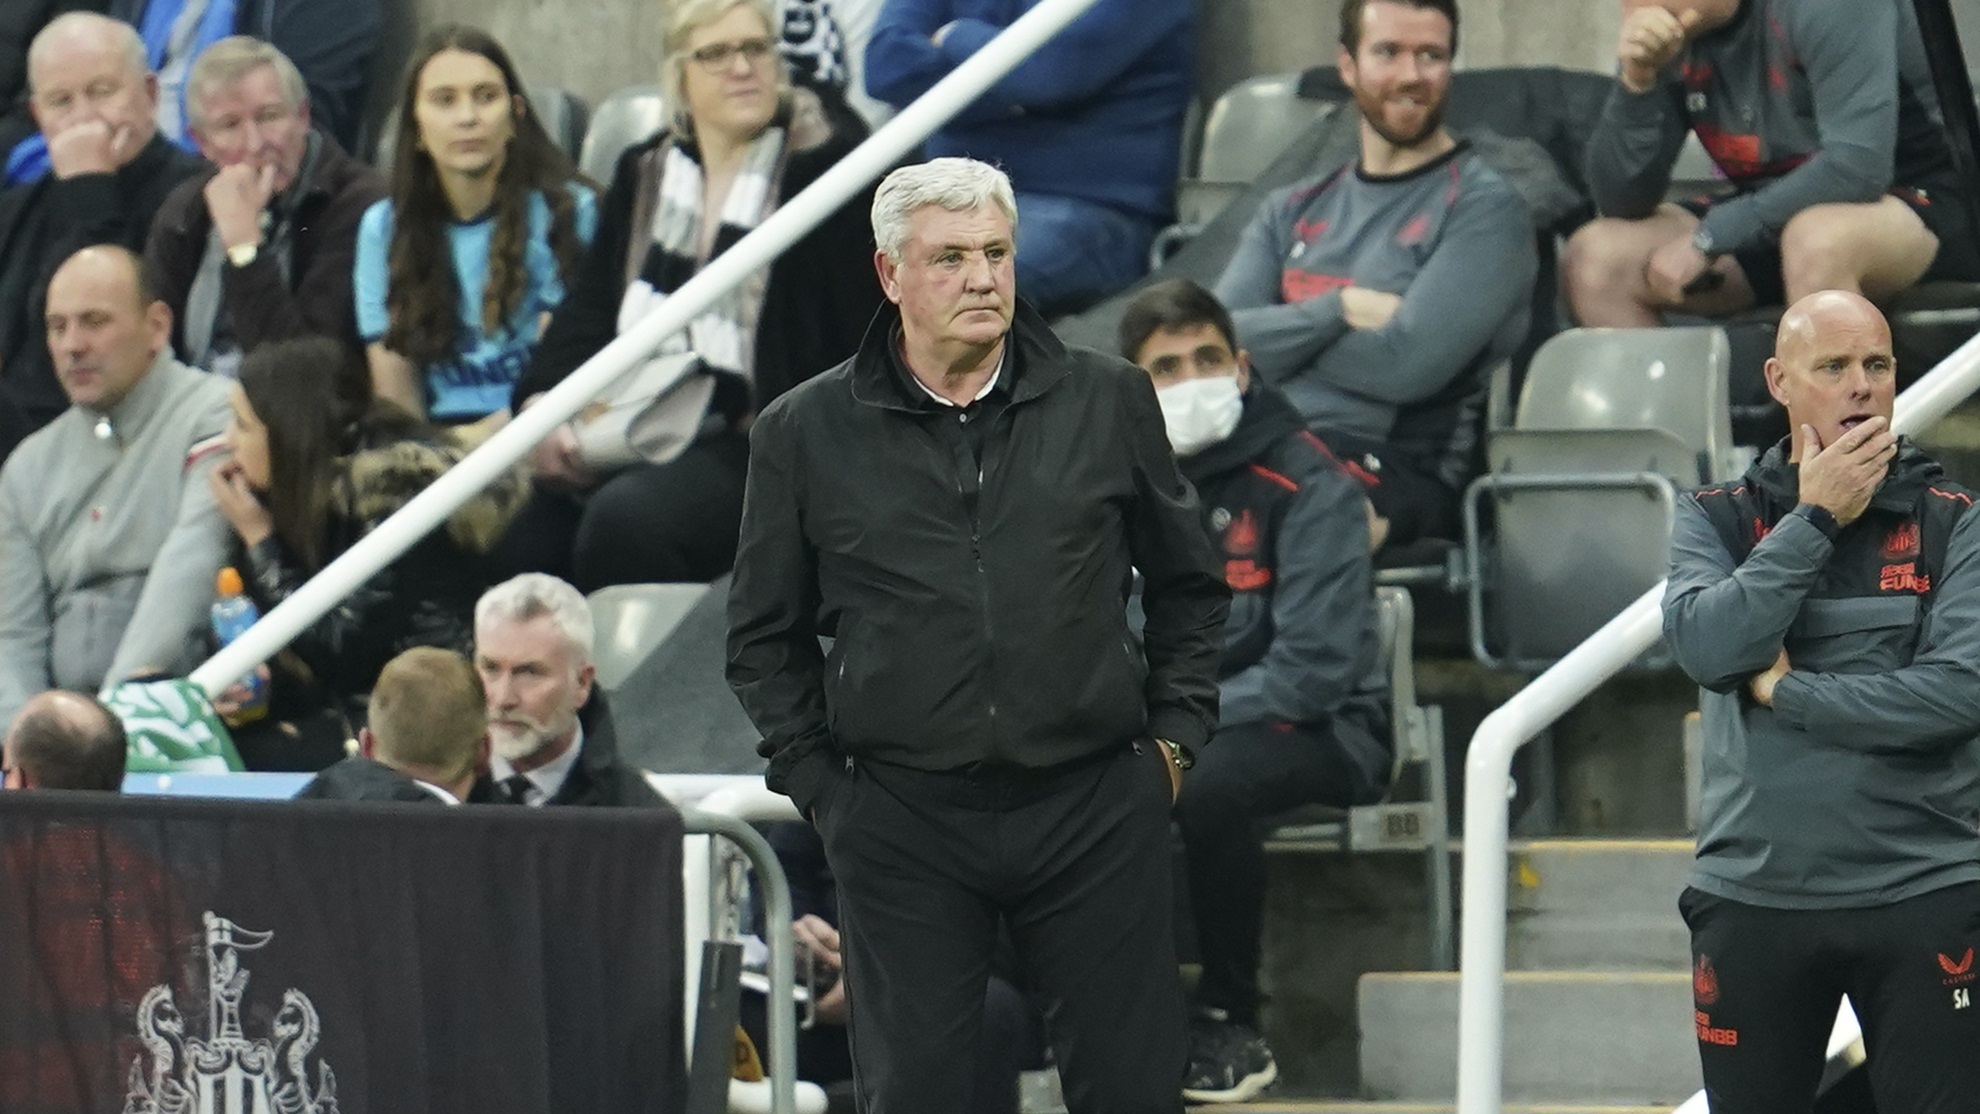 Steve Bruce watches the play during match between Newcastle and Spurs at St. James' Park.